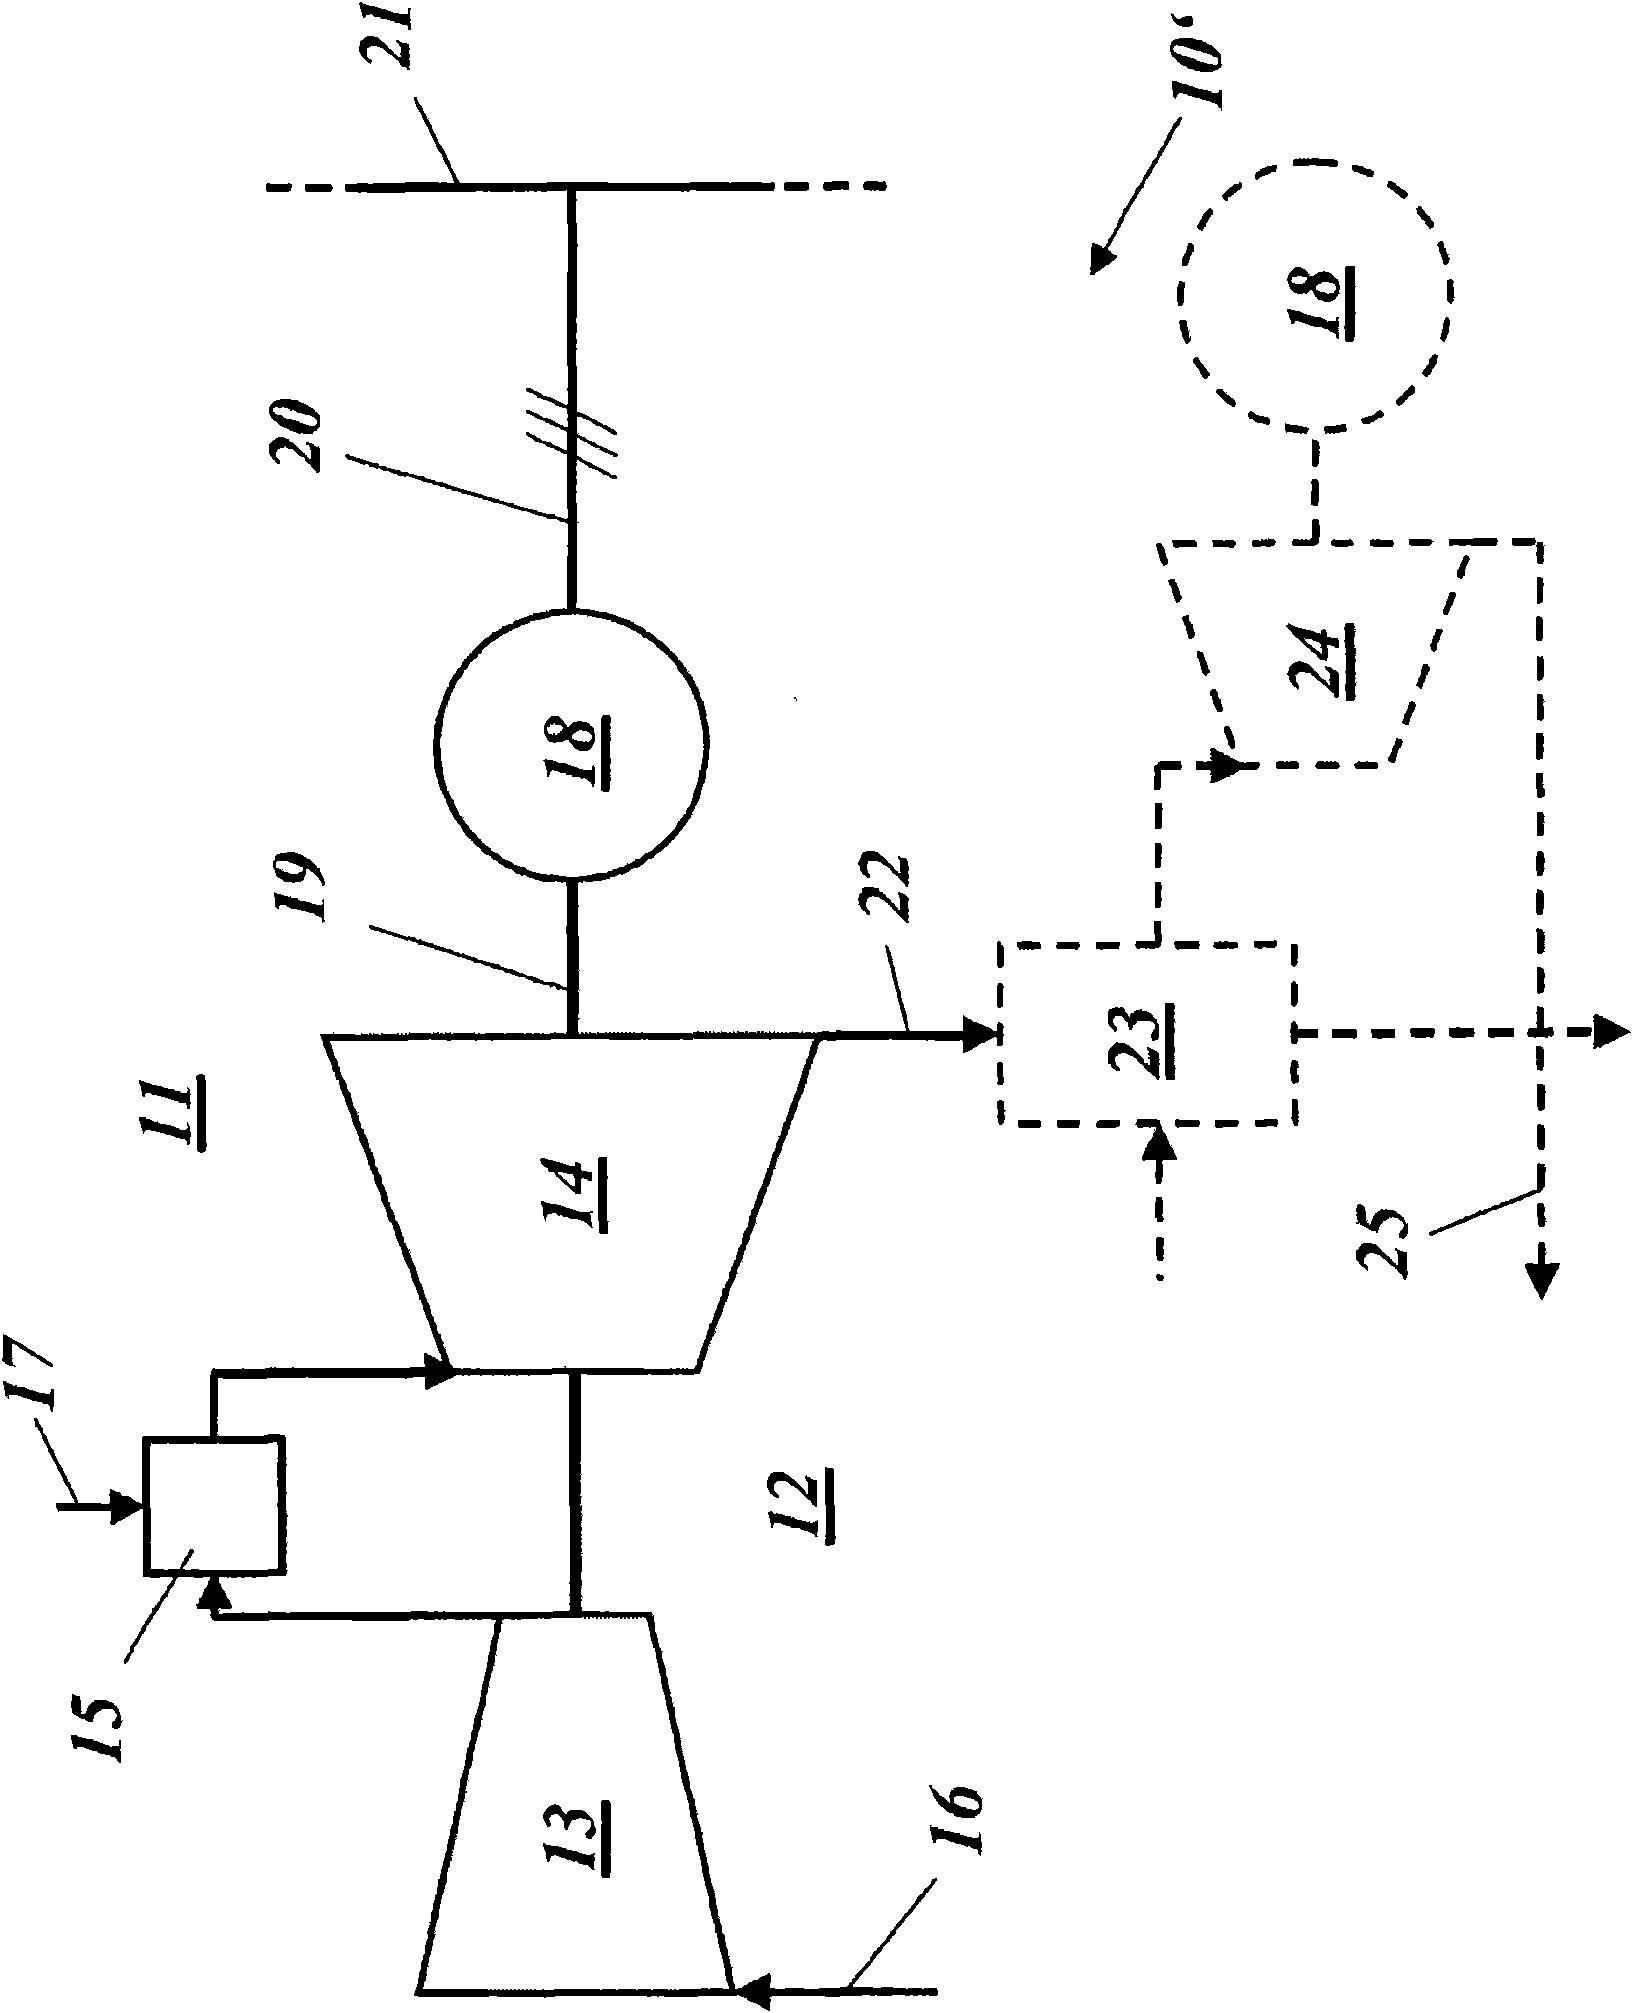 Power plant system and method for the operation thereof